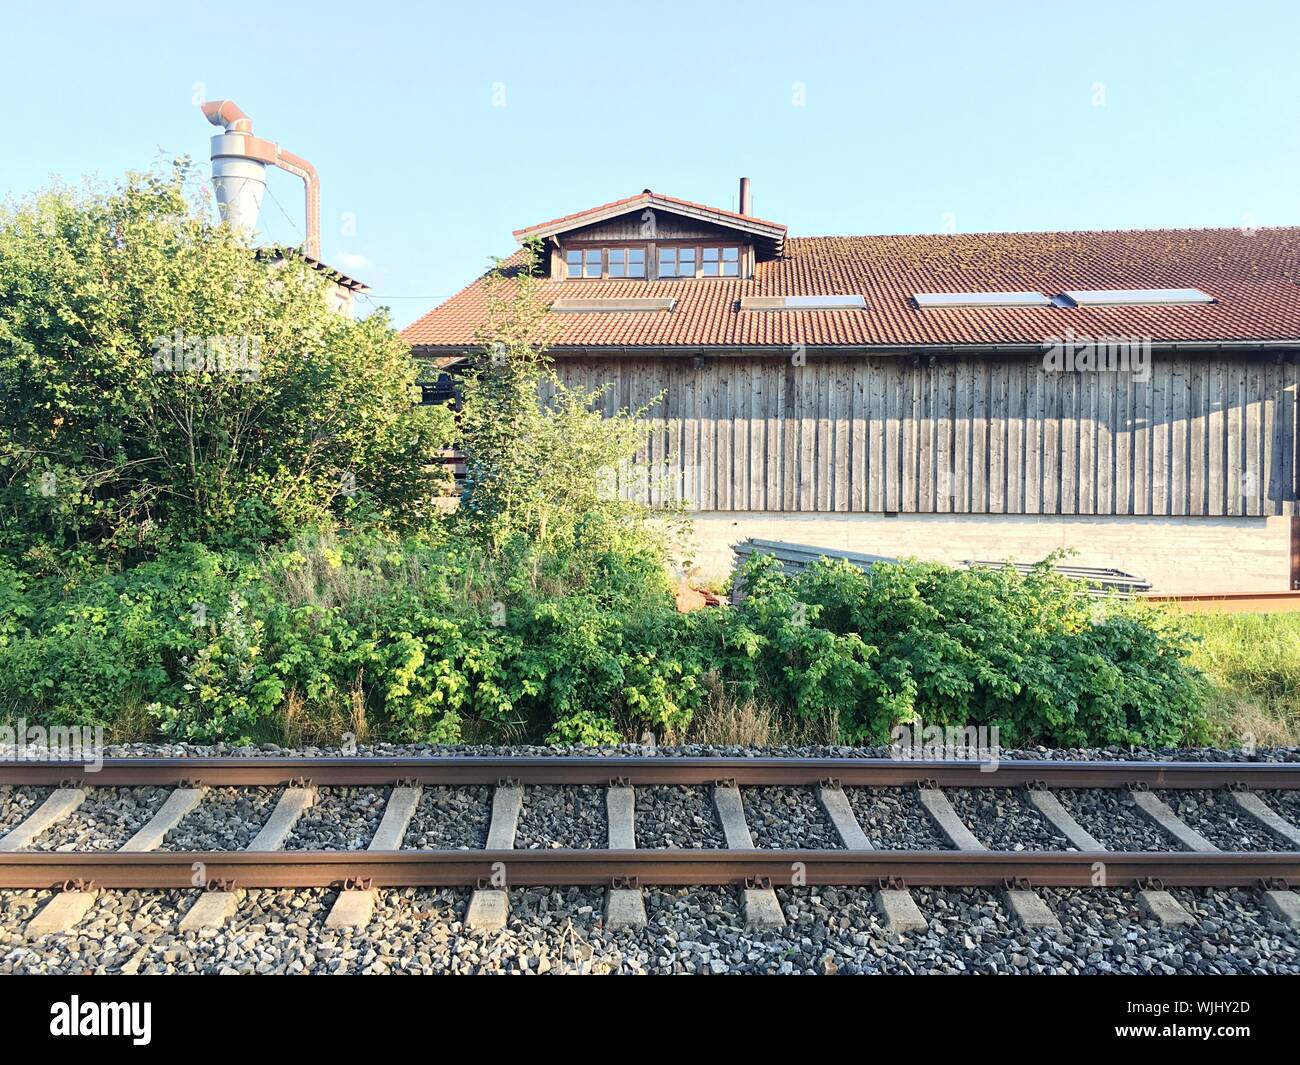 Railroad Track By Plants Stock Photo